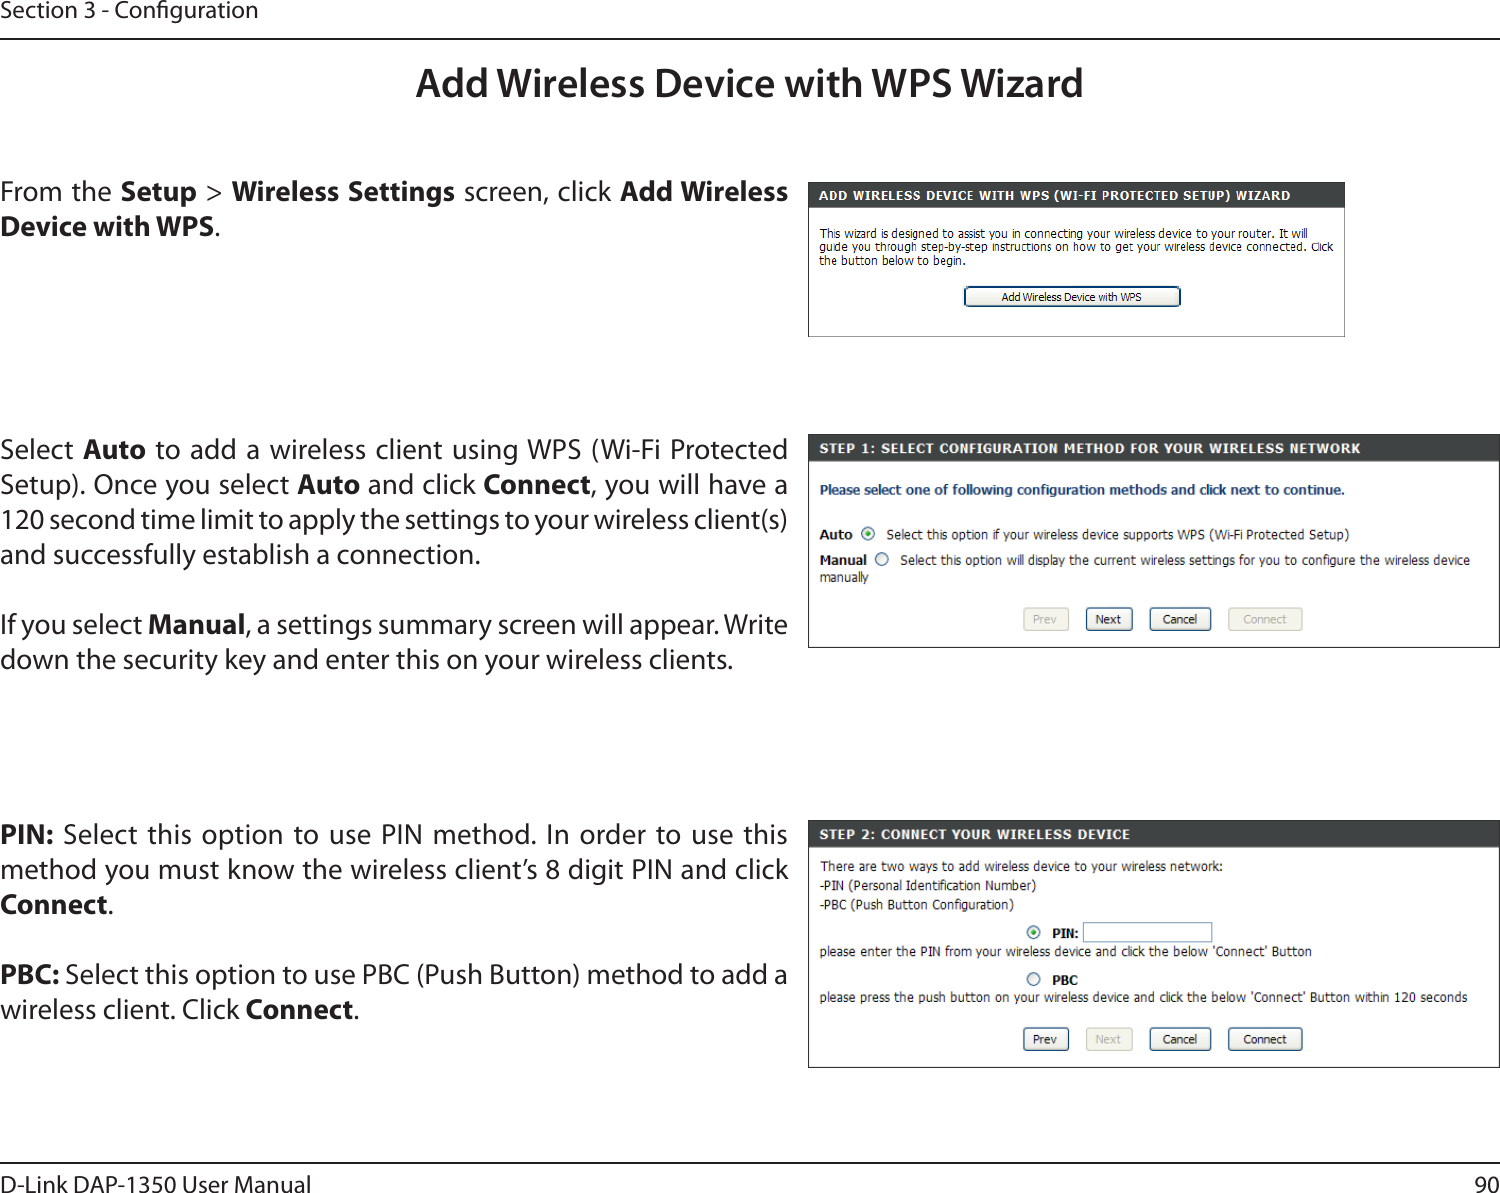 90D-Link DAP-1350 User ManualSection 3 - CongurationFrom the Setup &gt; Wireless Settings screen, click Add Wireless Device with WPS.Add Wireless Device with WPS WizardPIN: Select this option  to use  PIN method. In  order to use  this method you must know the wireless client’s 8 digit PIN and click Connect.PBC: Select this option to use PBC (Push Button) method to add a wireless client. Click Connect.Select Auto to add a wireless client using WPS (Wi-Fi Protected Setup). Once you select Auto and click Connect, you will have a 120 second time limit to apply the settings to your wireless client(s) and successfully establish a connection. If you select Manual, a settings summary screen will appear. Write down the security key and enter this on your wireless clients. 